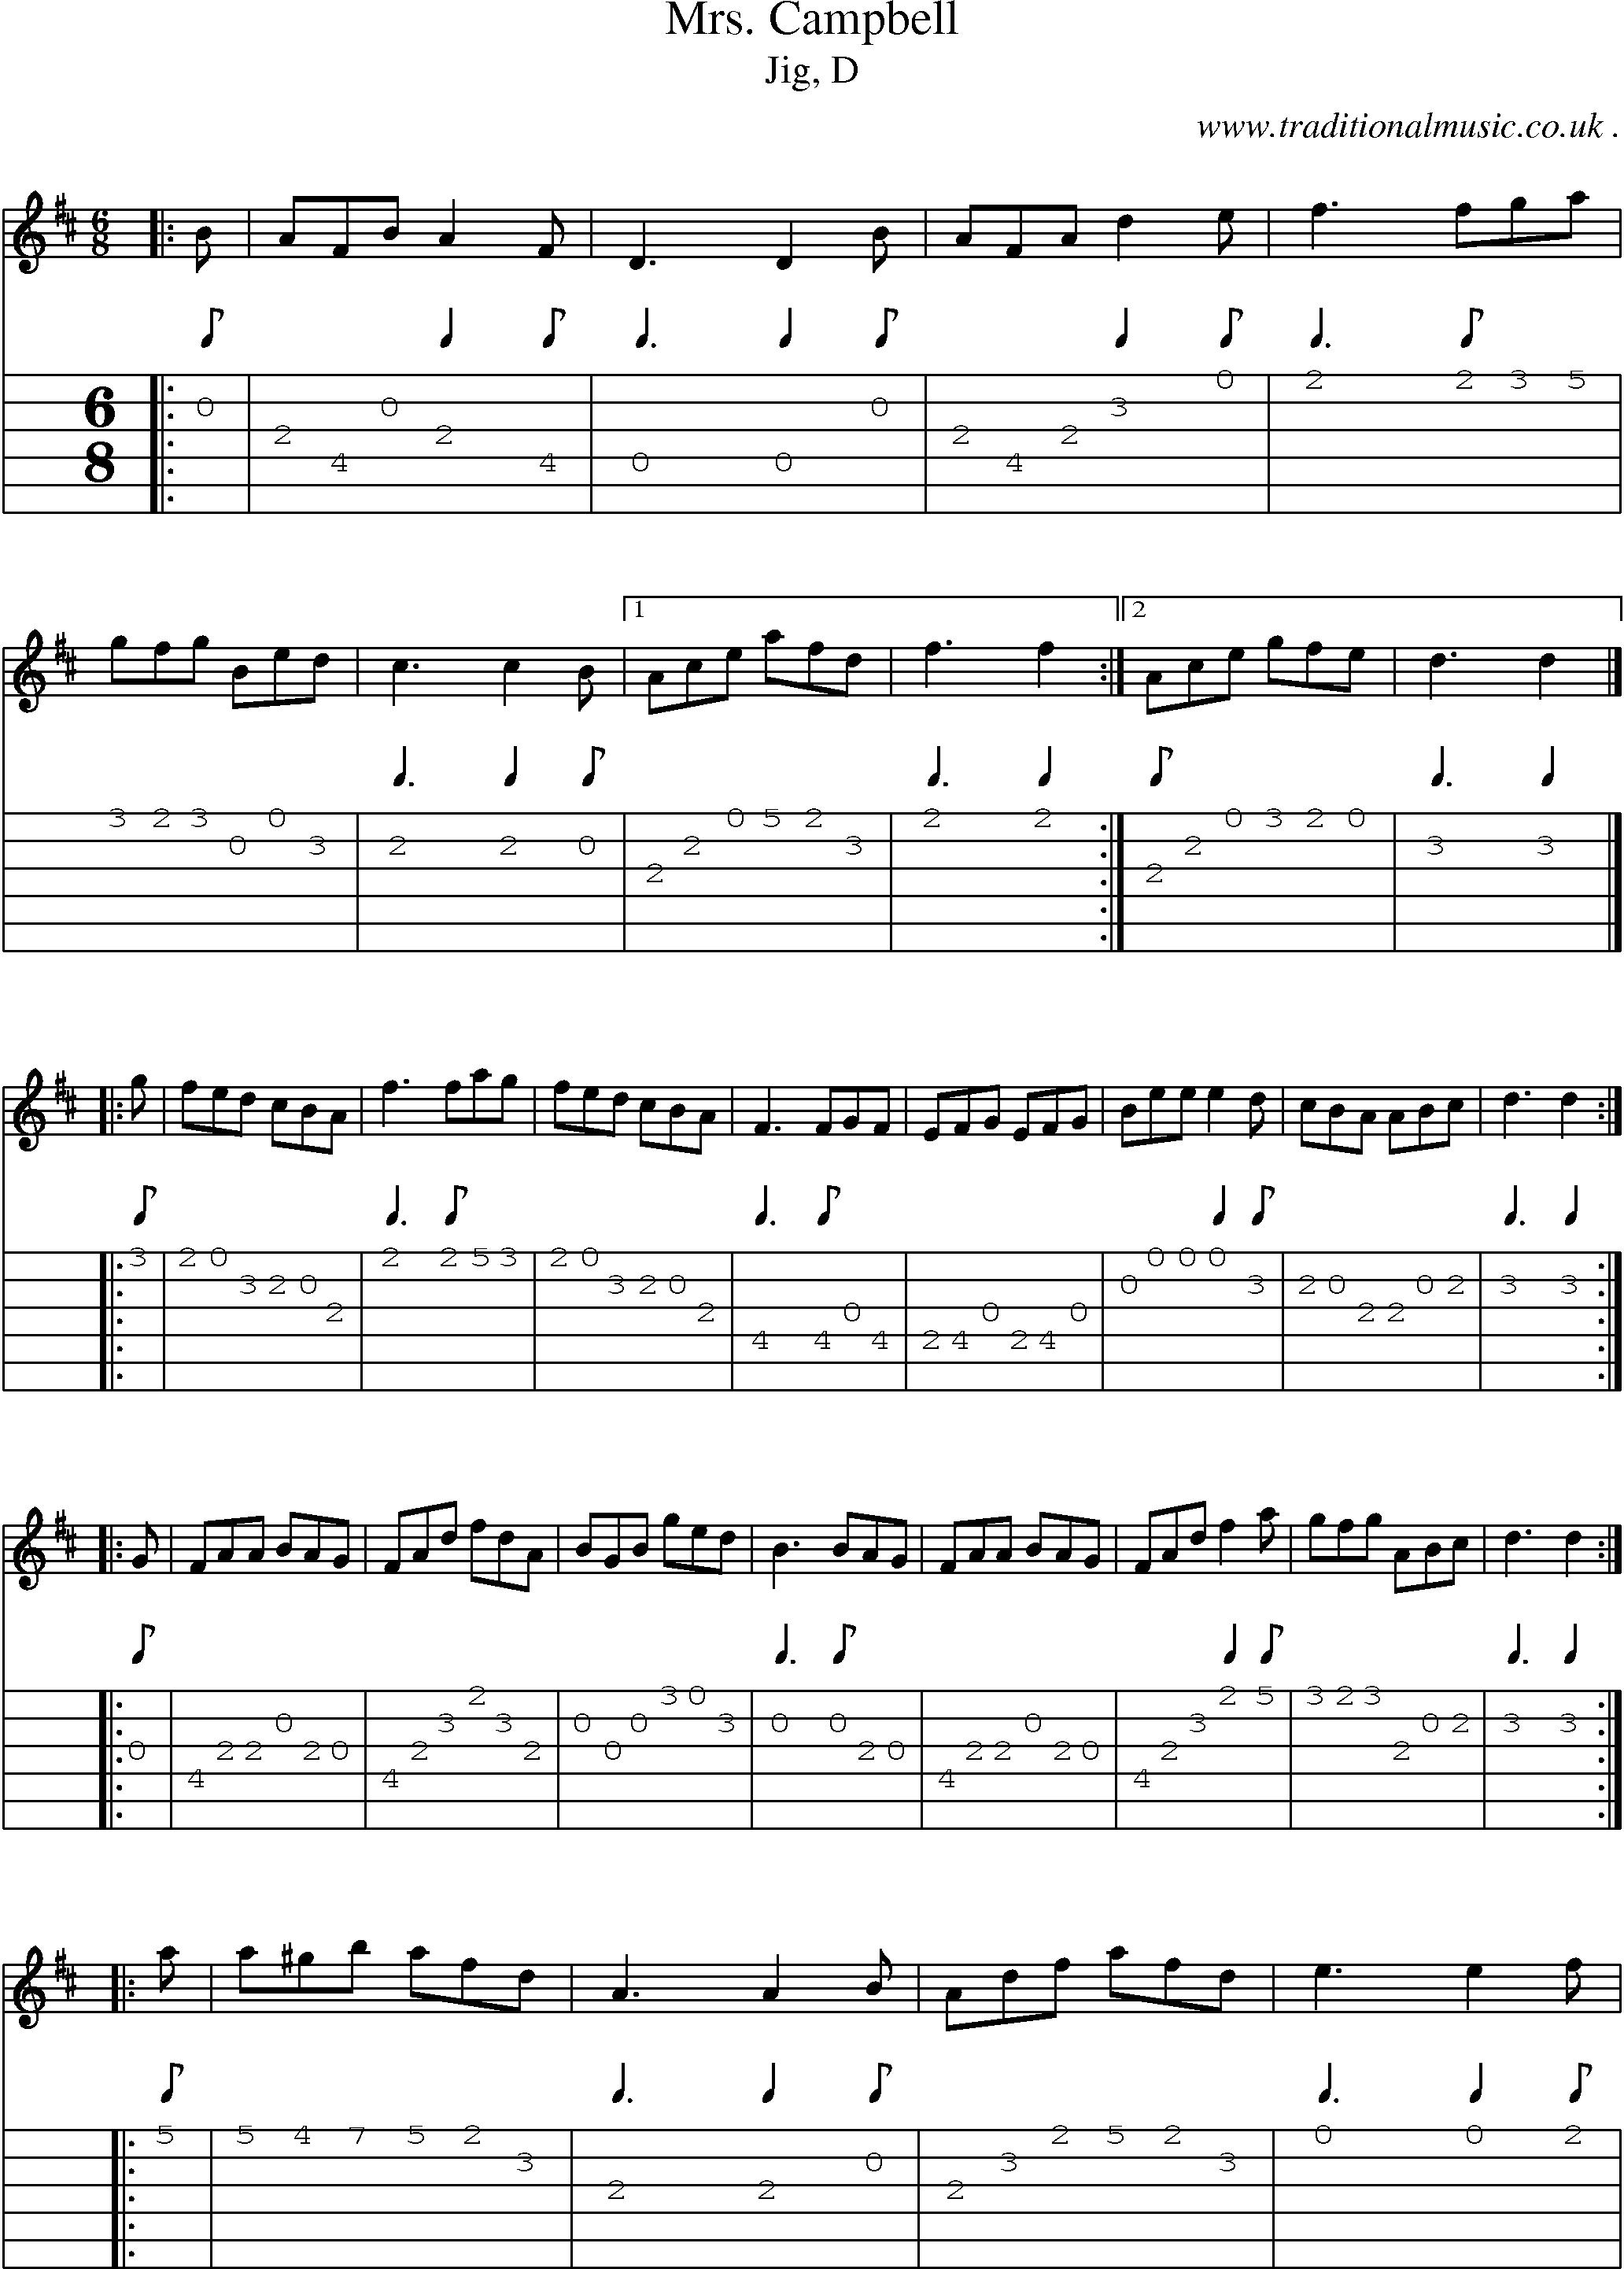 Sheet-music  score, Chords and Guitar Tabs for Mrs Campbell